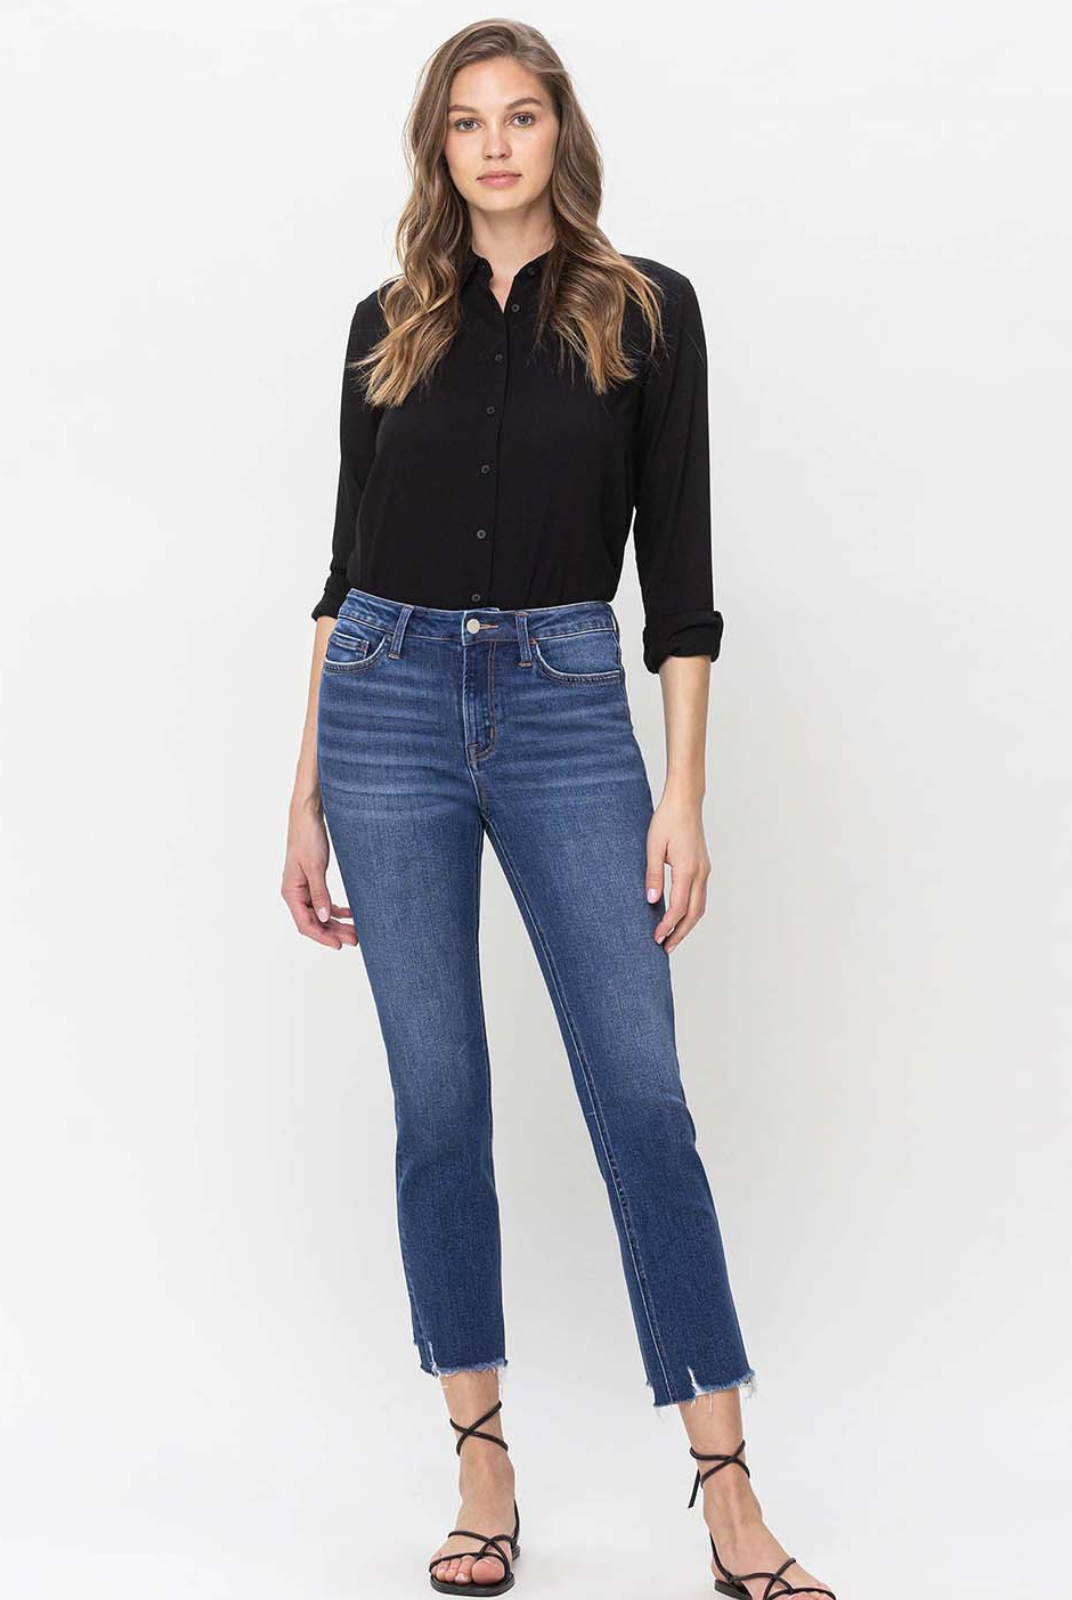 Flying Monkey Cropped Slim Straight - Effusive.  Effusive jeans exude effortless style with their comfortable stretch denim, high rise waist, and chic frayed step hem. The cropped length and slim straight cut elevate any look to a level of fashionable refinement. 